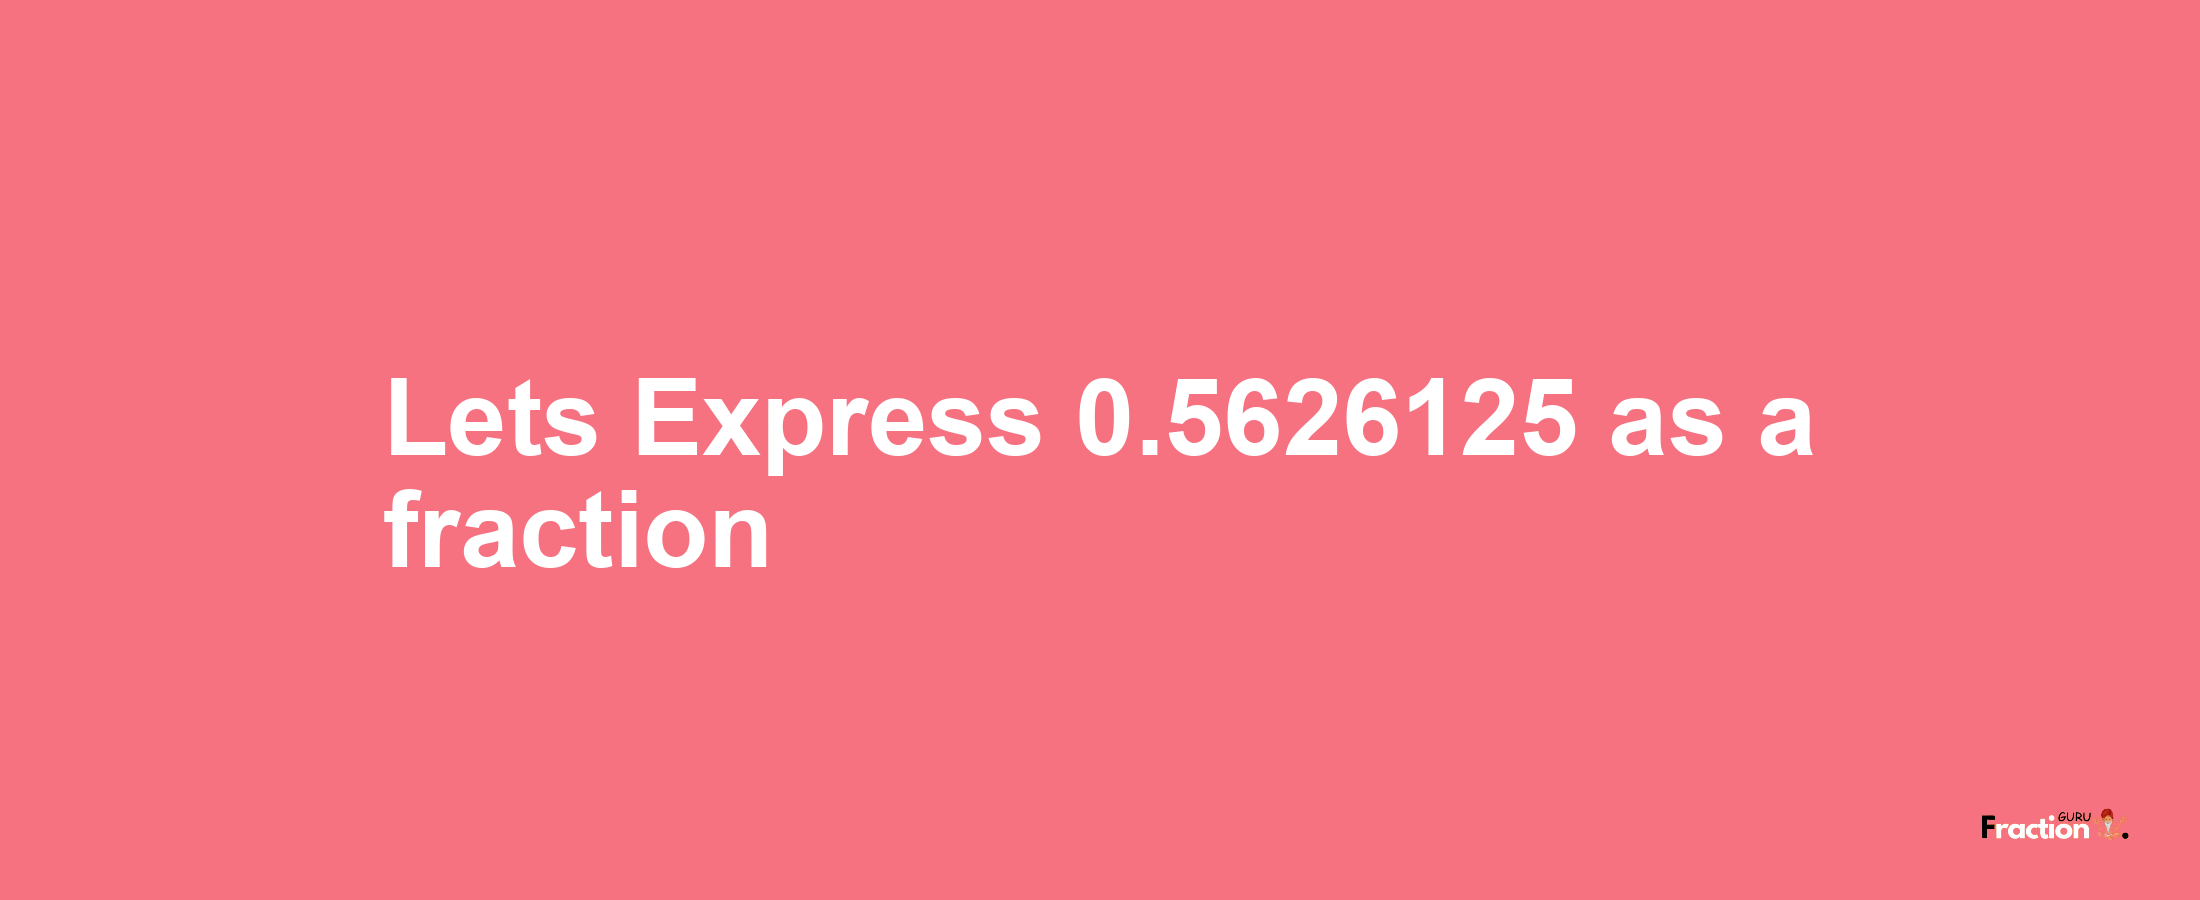 Lets Express 0.5626125 as afraction